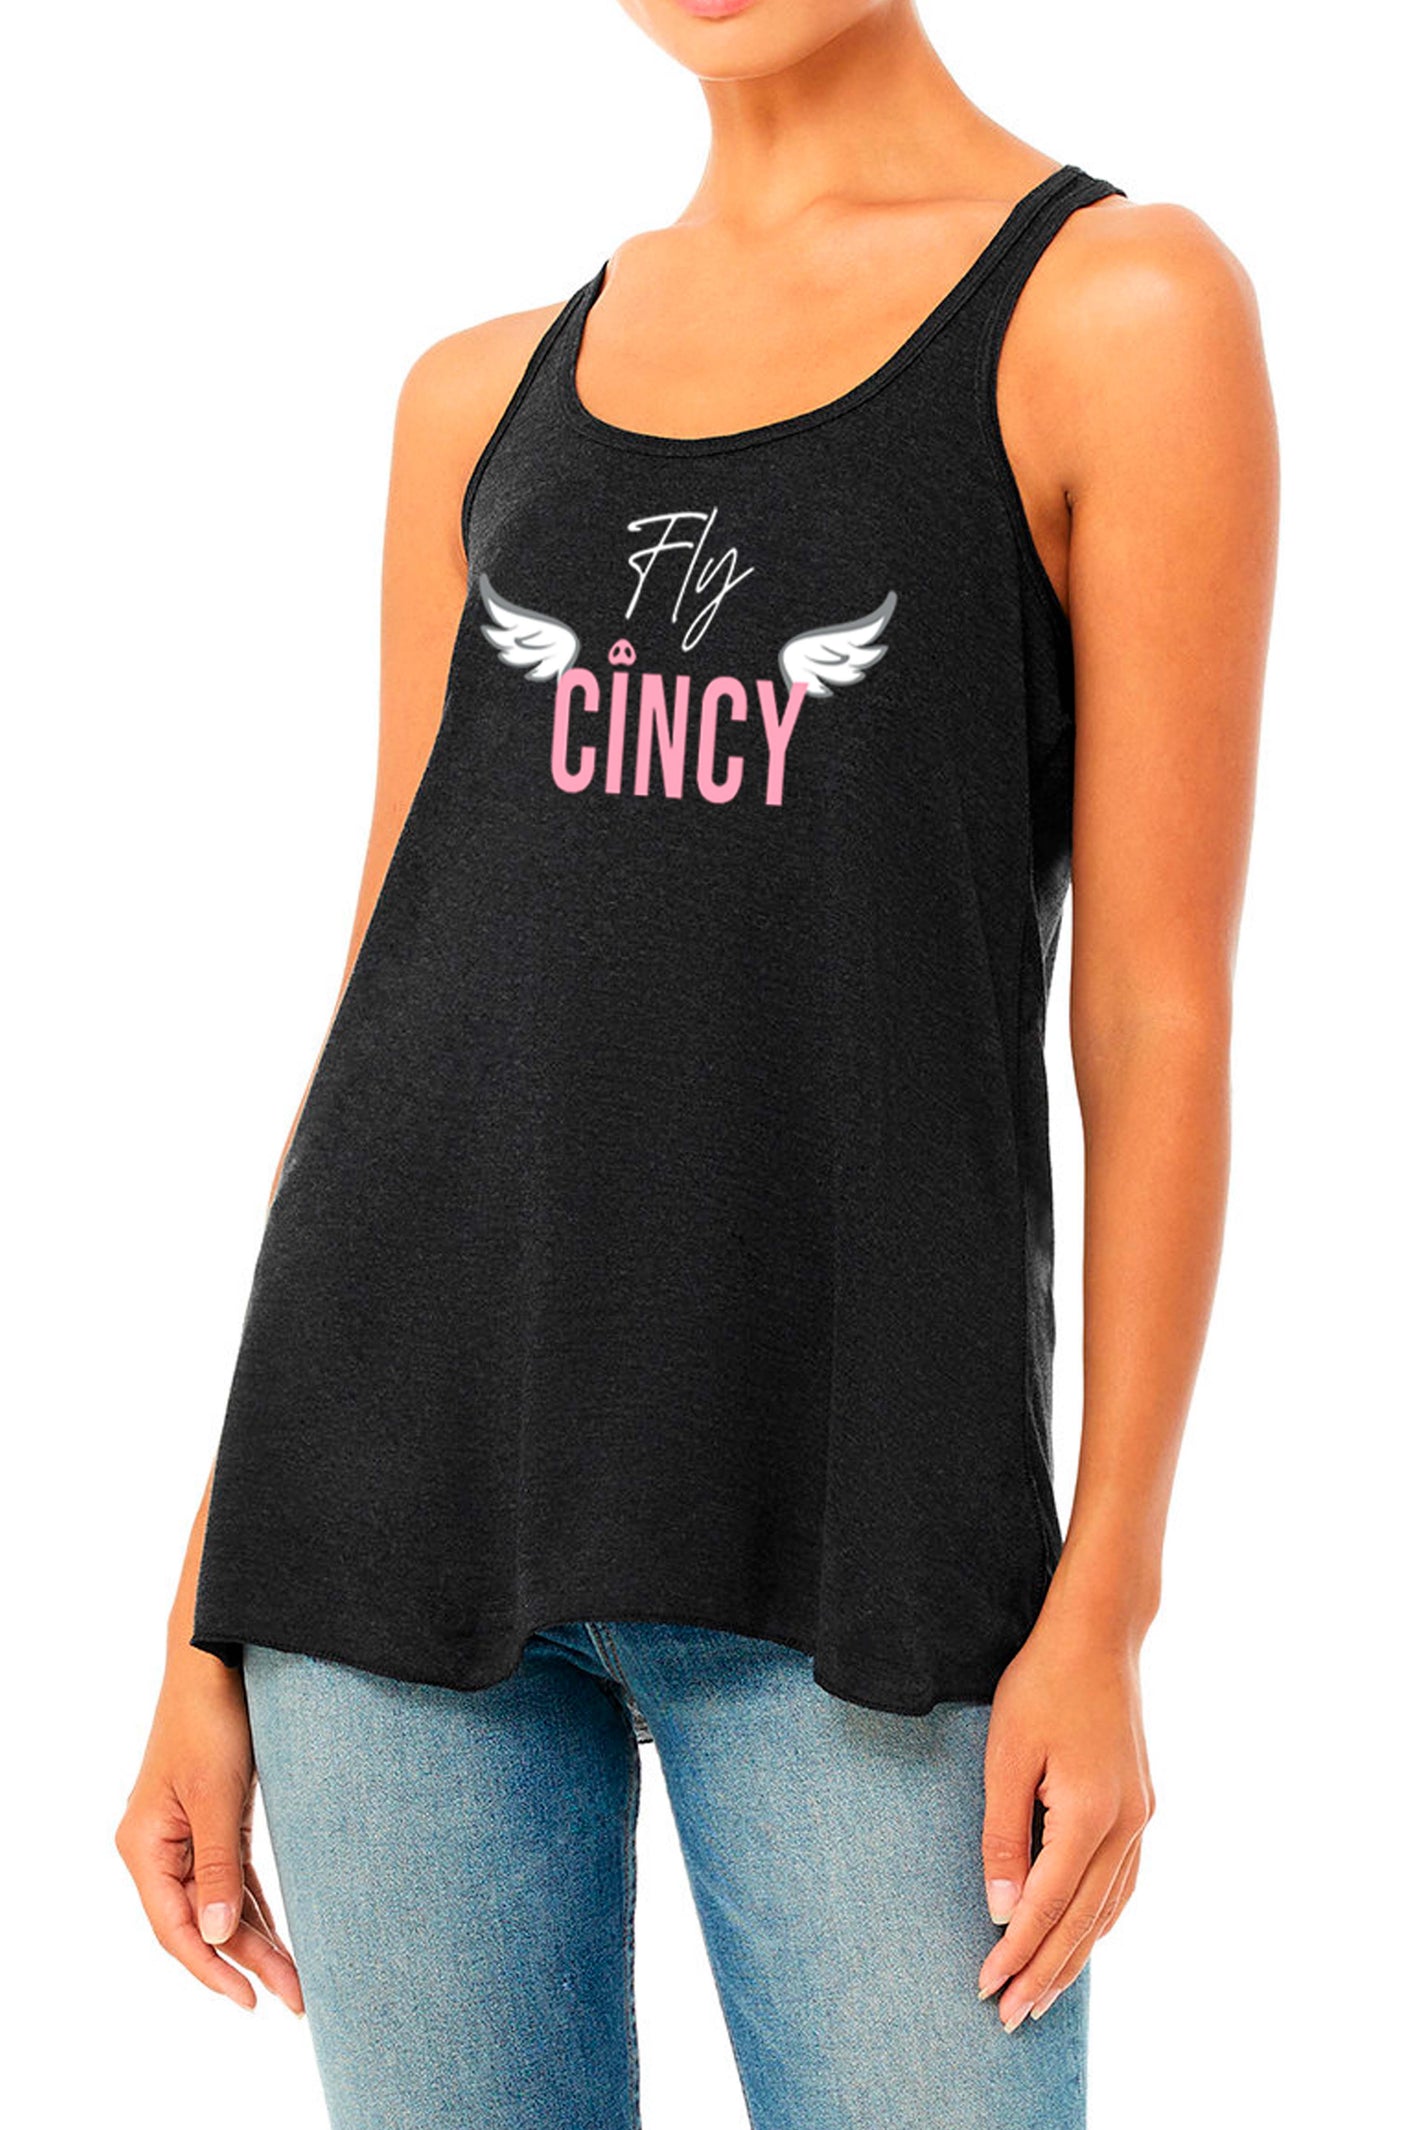 "When Pigs Fly" Fly Cincy Gathered Back Tank - Heather Black